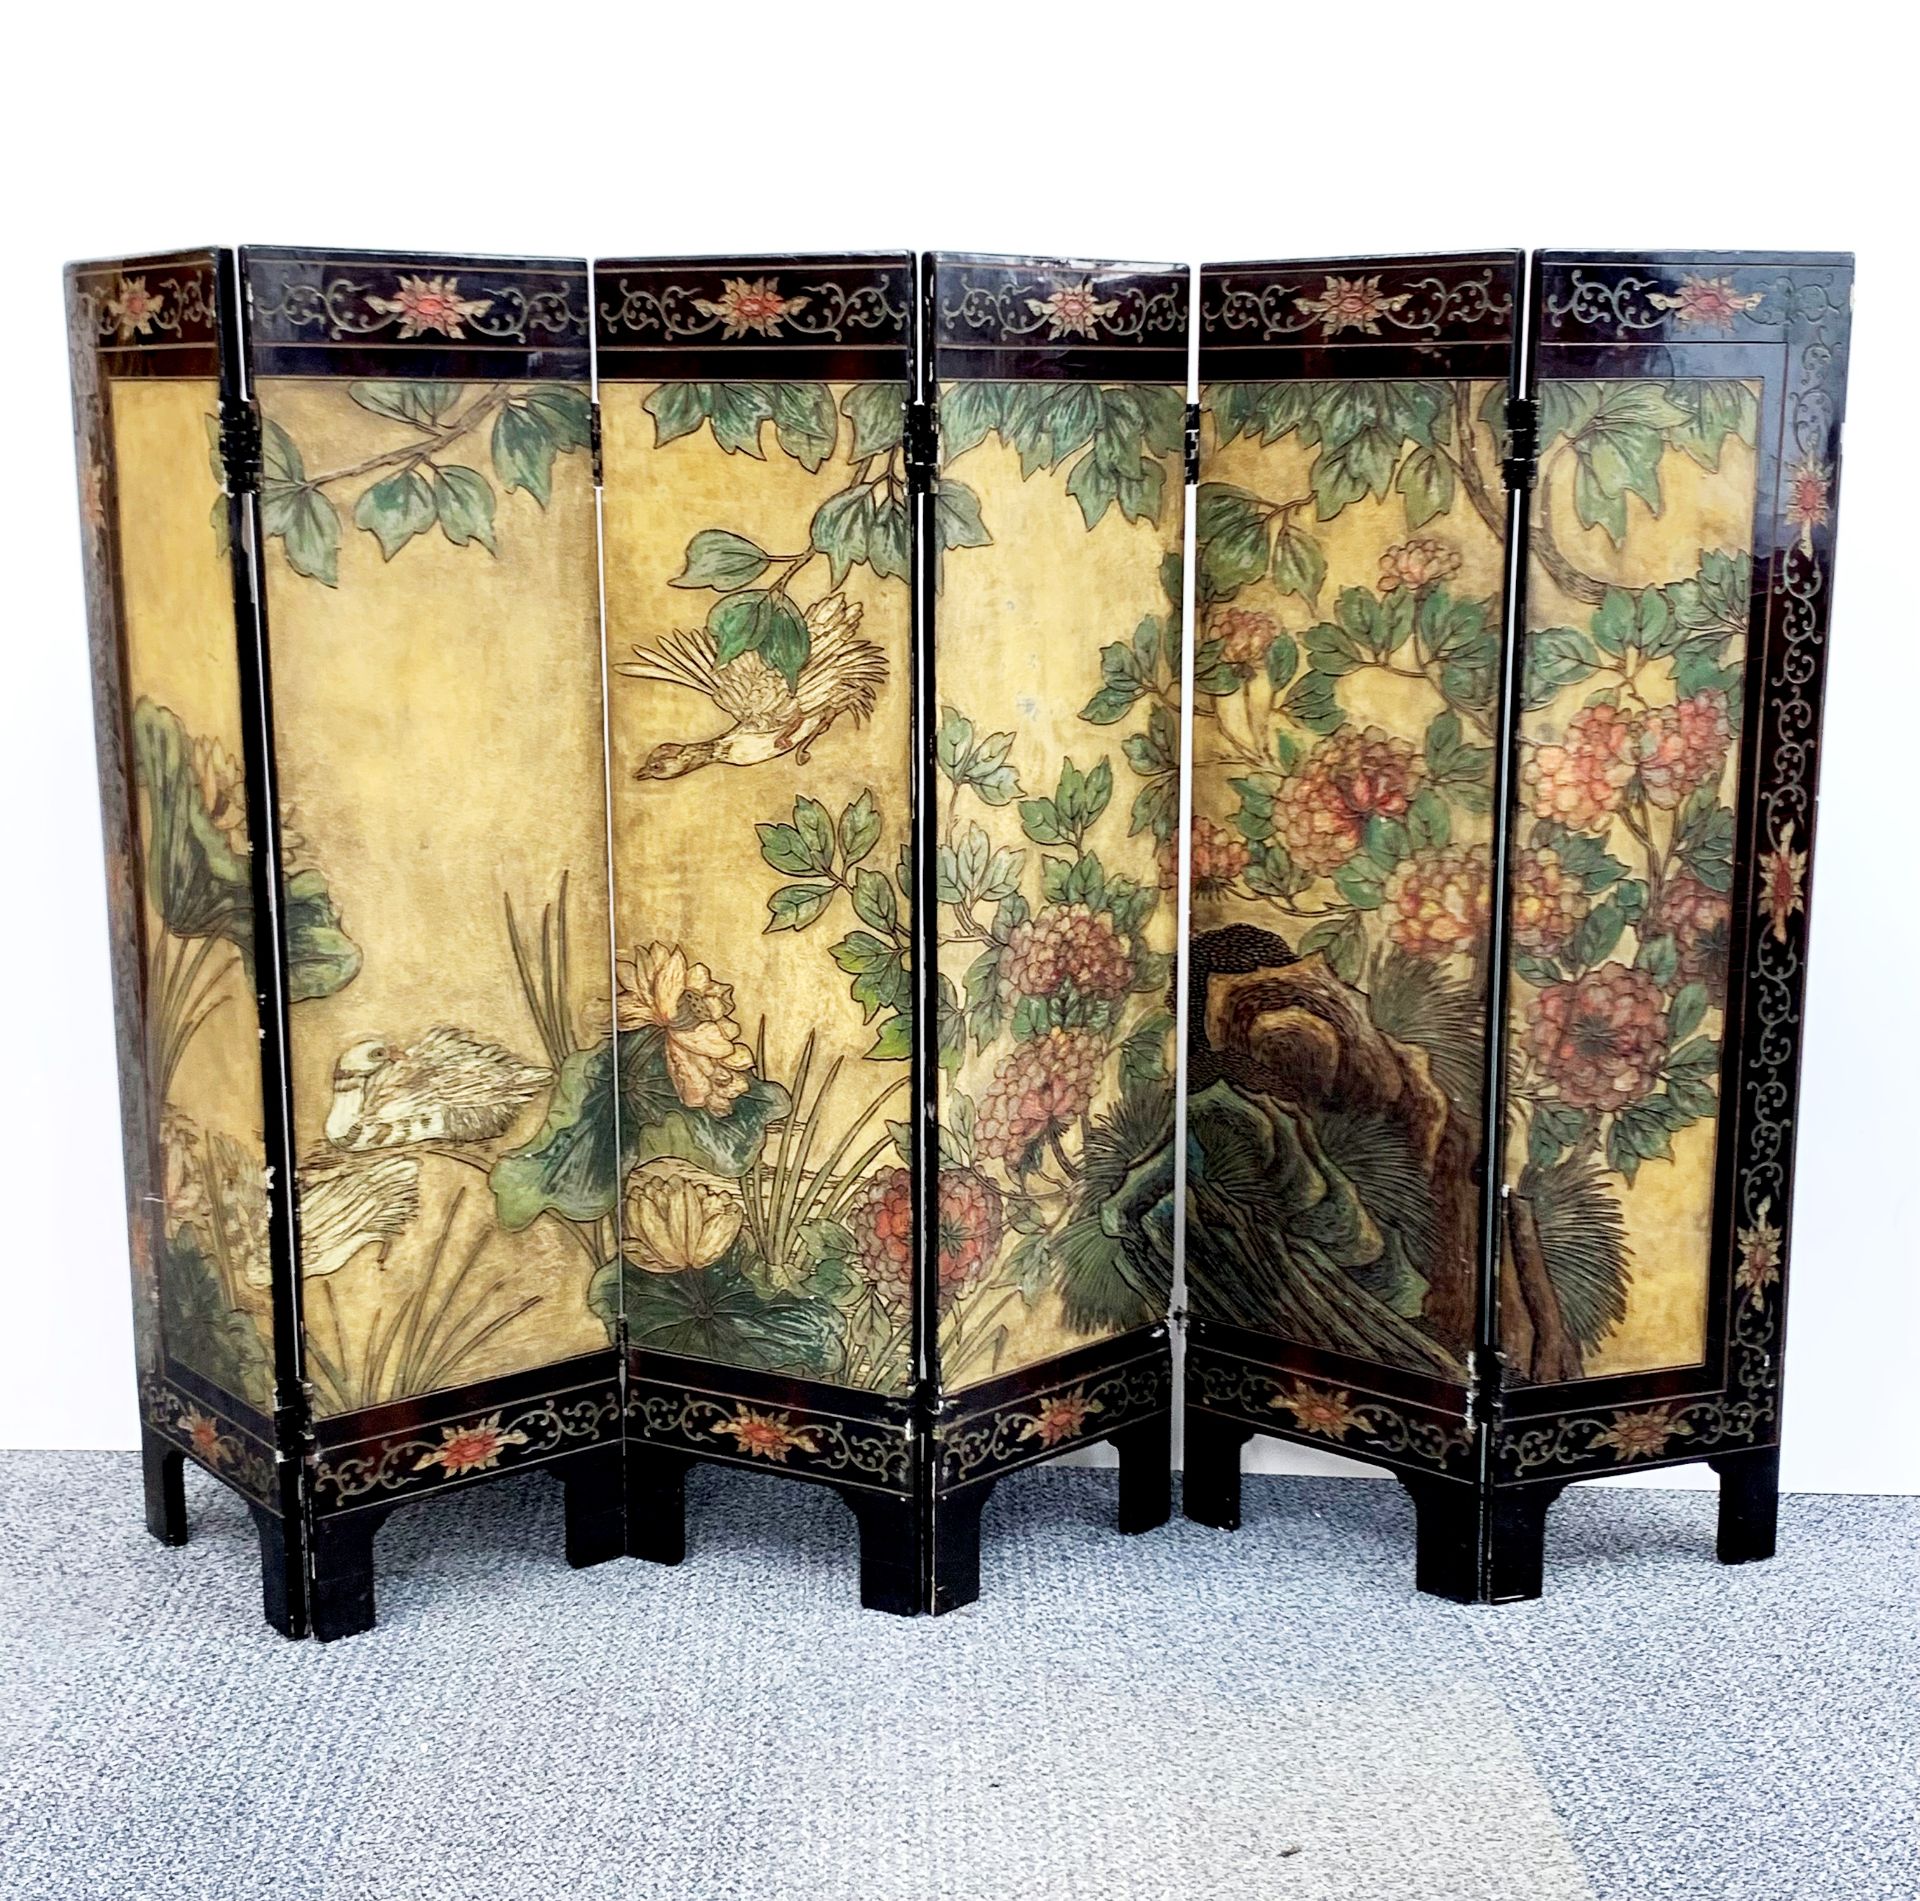 A mid-20th century Chinese hand-painted folding lacquer screen, H. 99cm. each panel W. 25cm. - Image 2 of 2